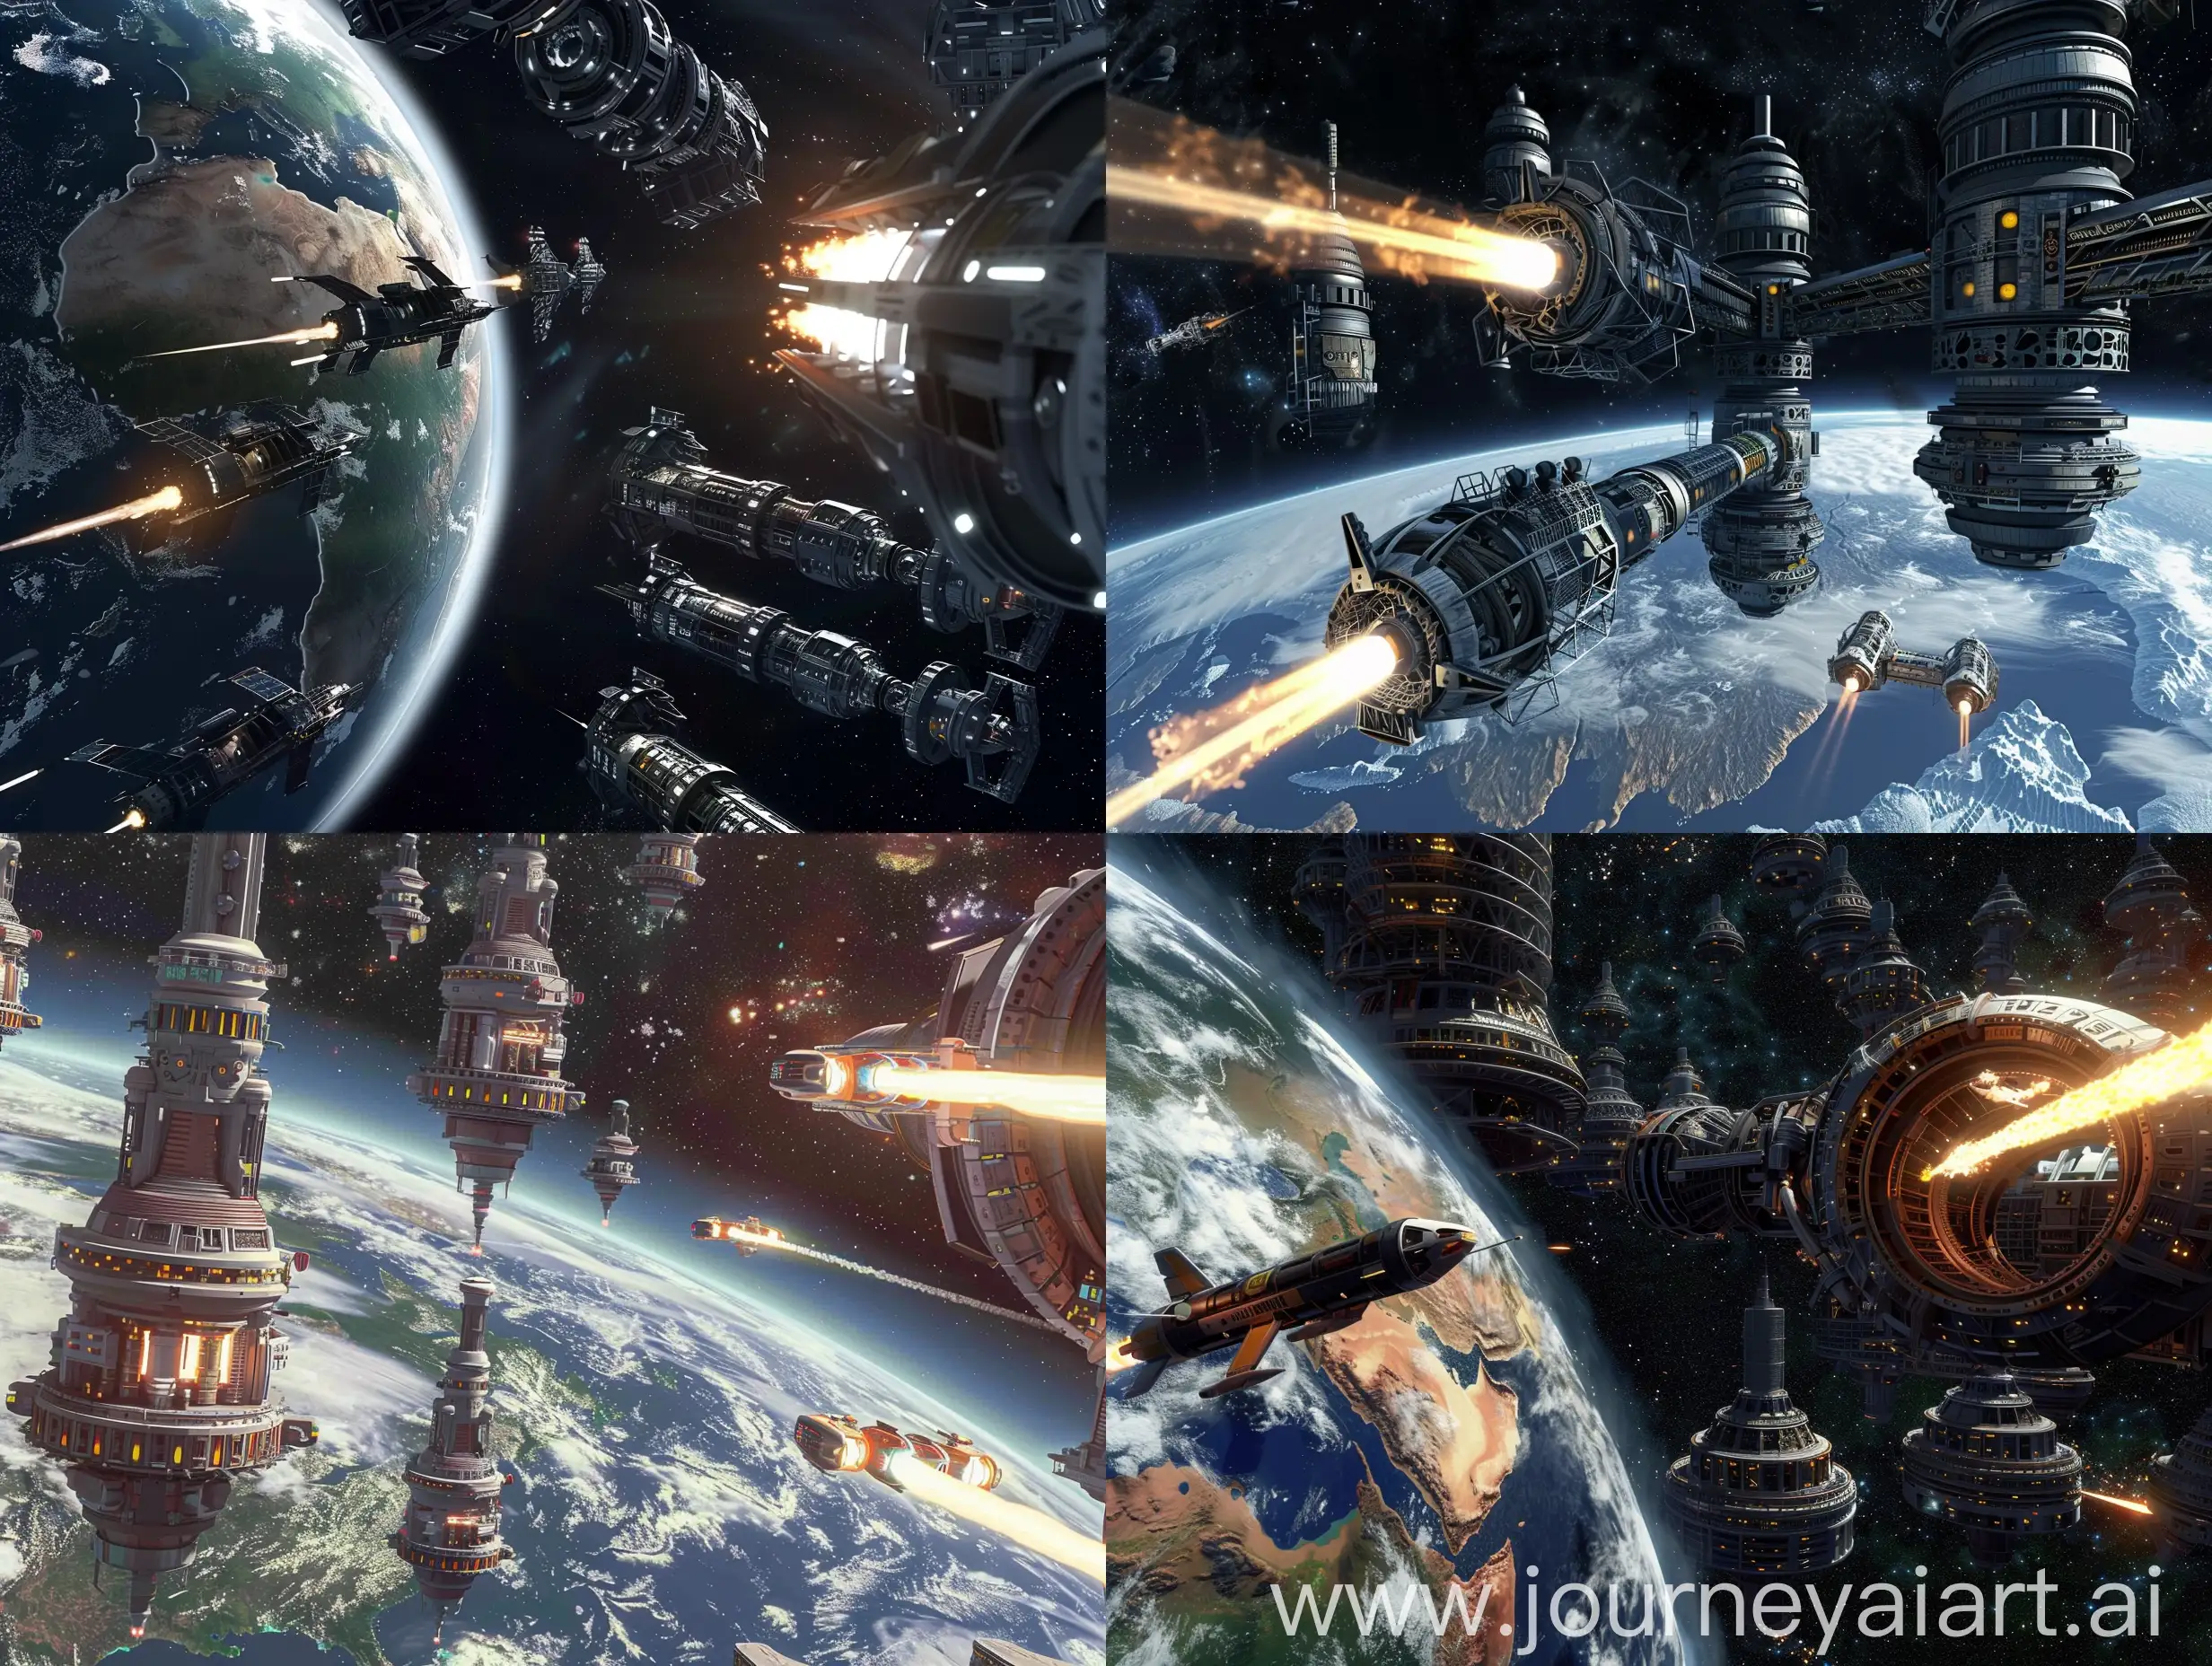 Spacecraft-Orbiting-Earth-Industrial-Steel-Bases-and-Spaceships-in-3D-Pixar-Animation-Style